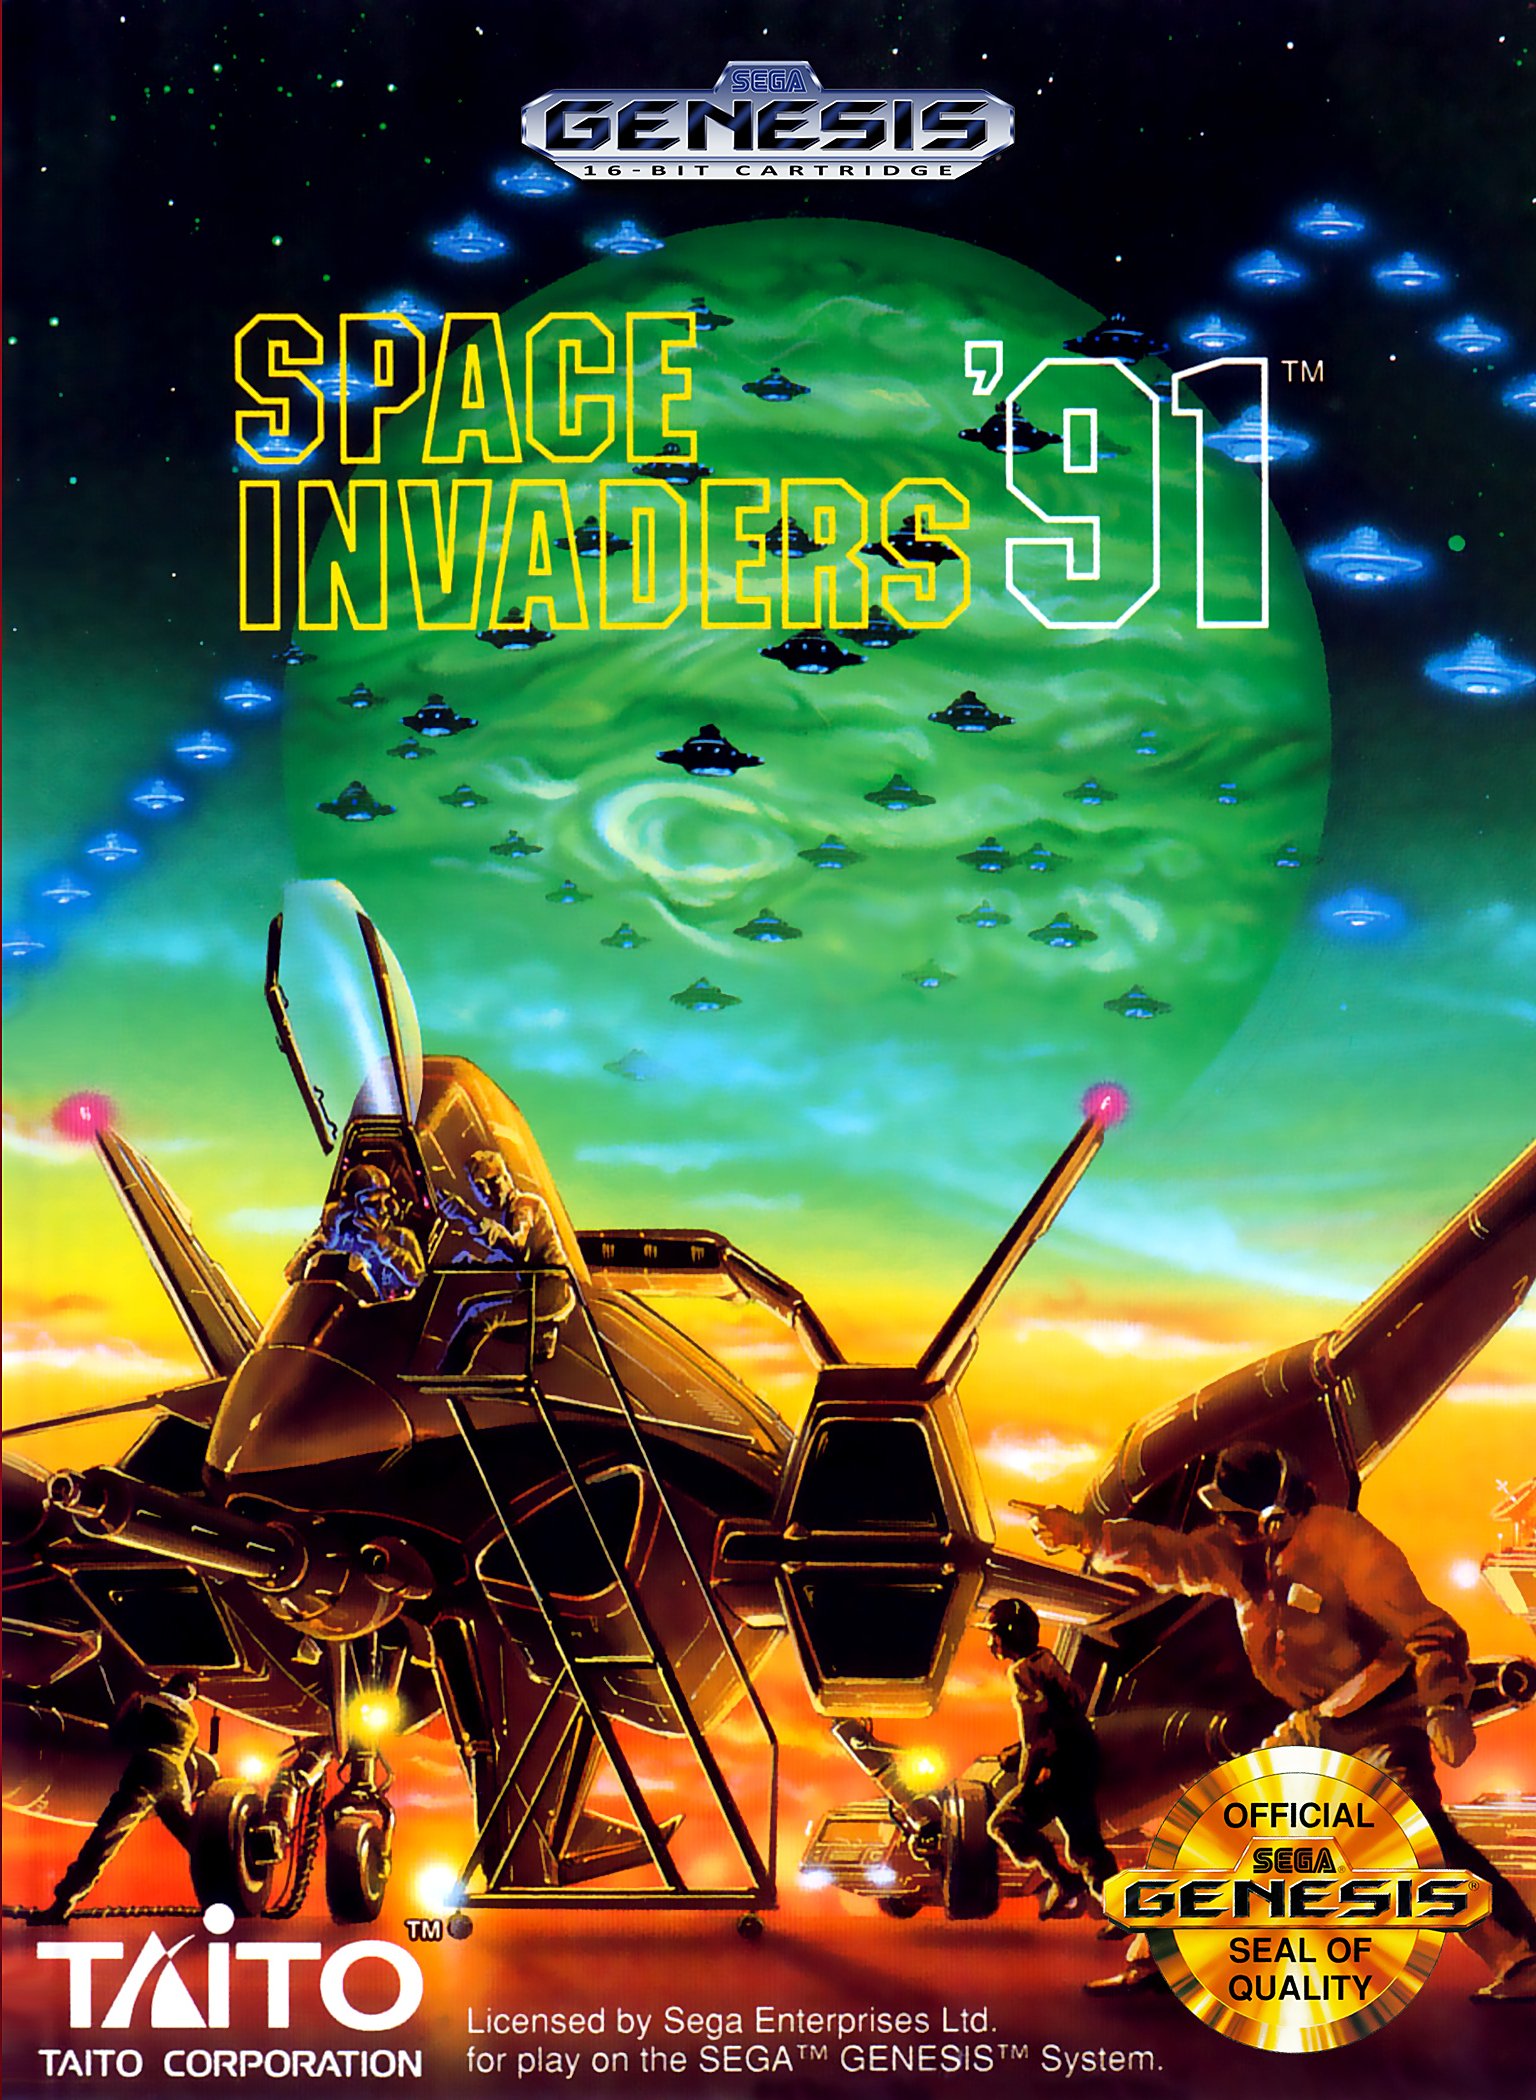 Image of Space Invaders '91